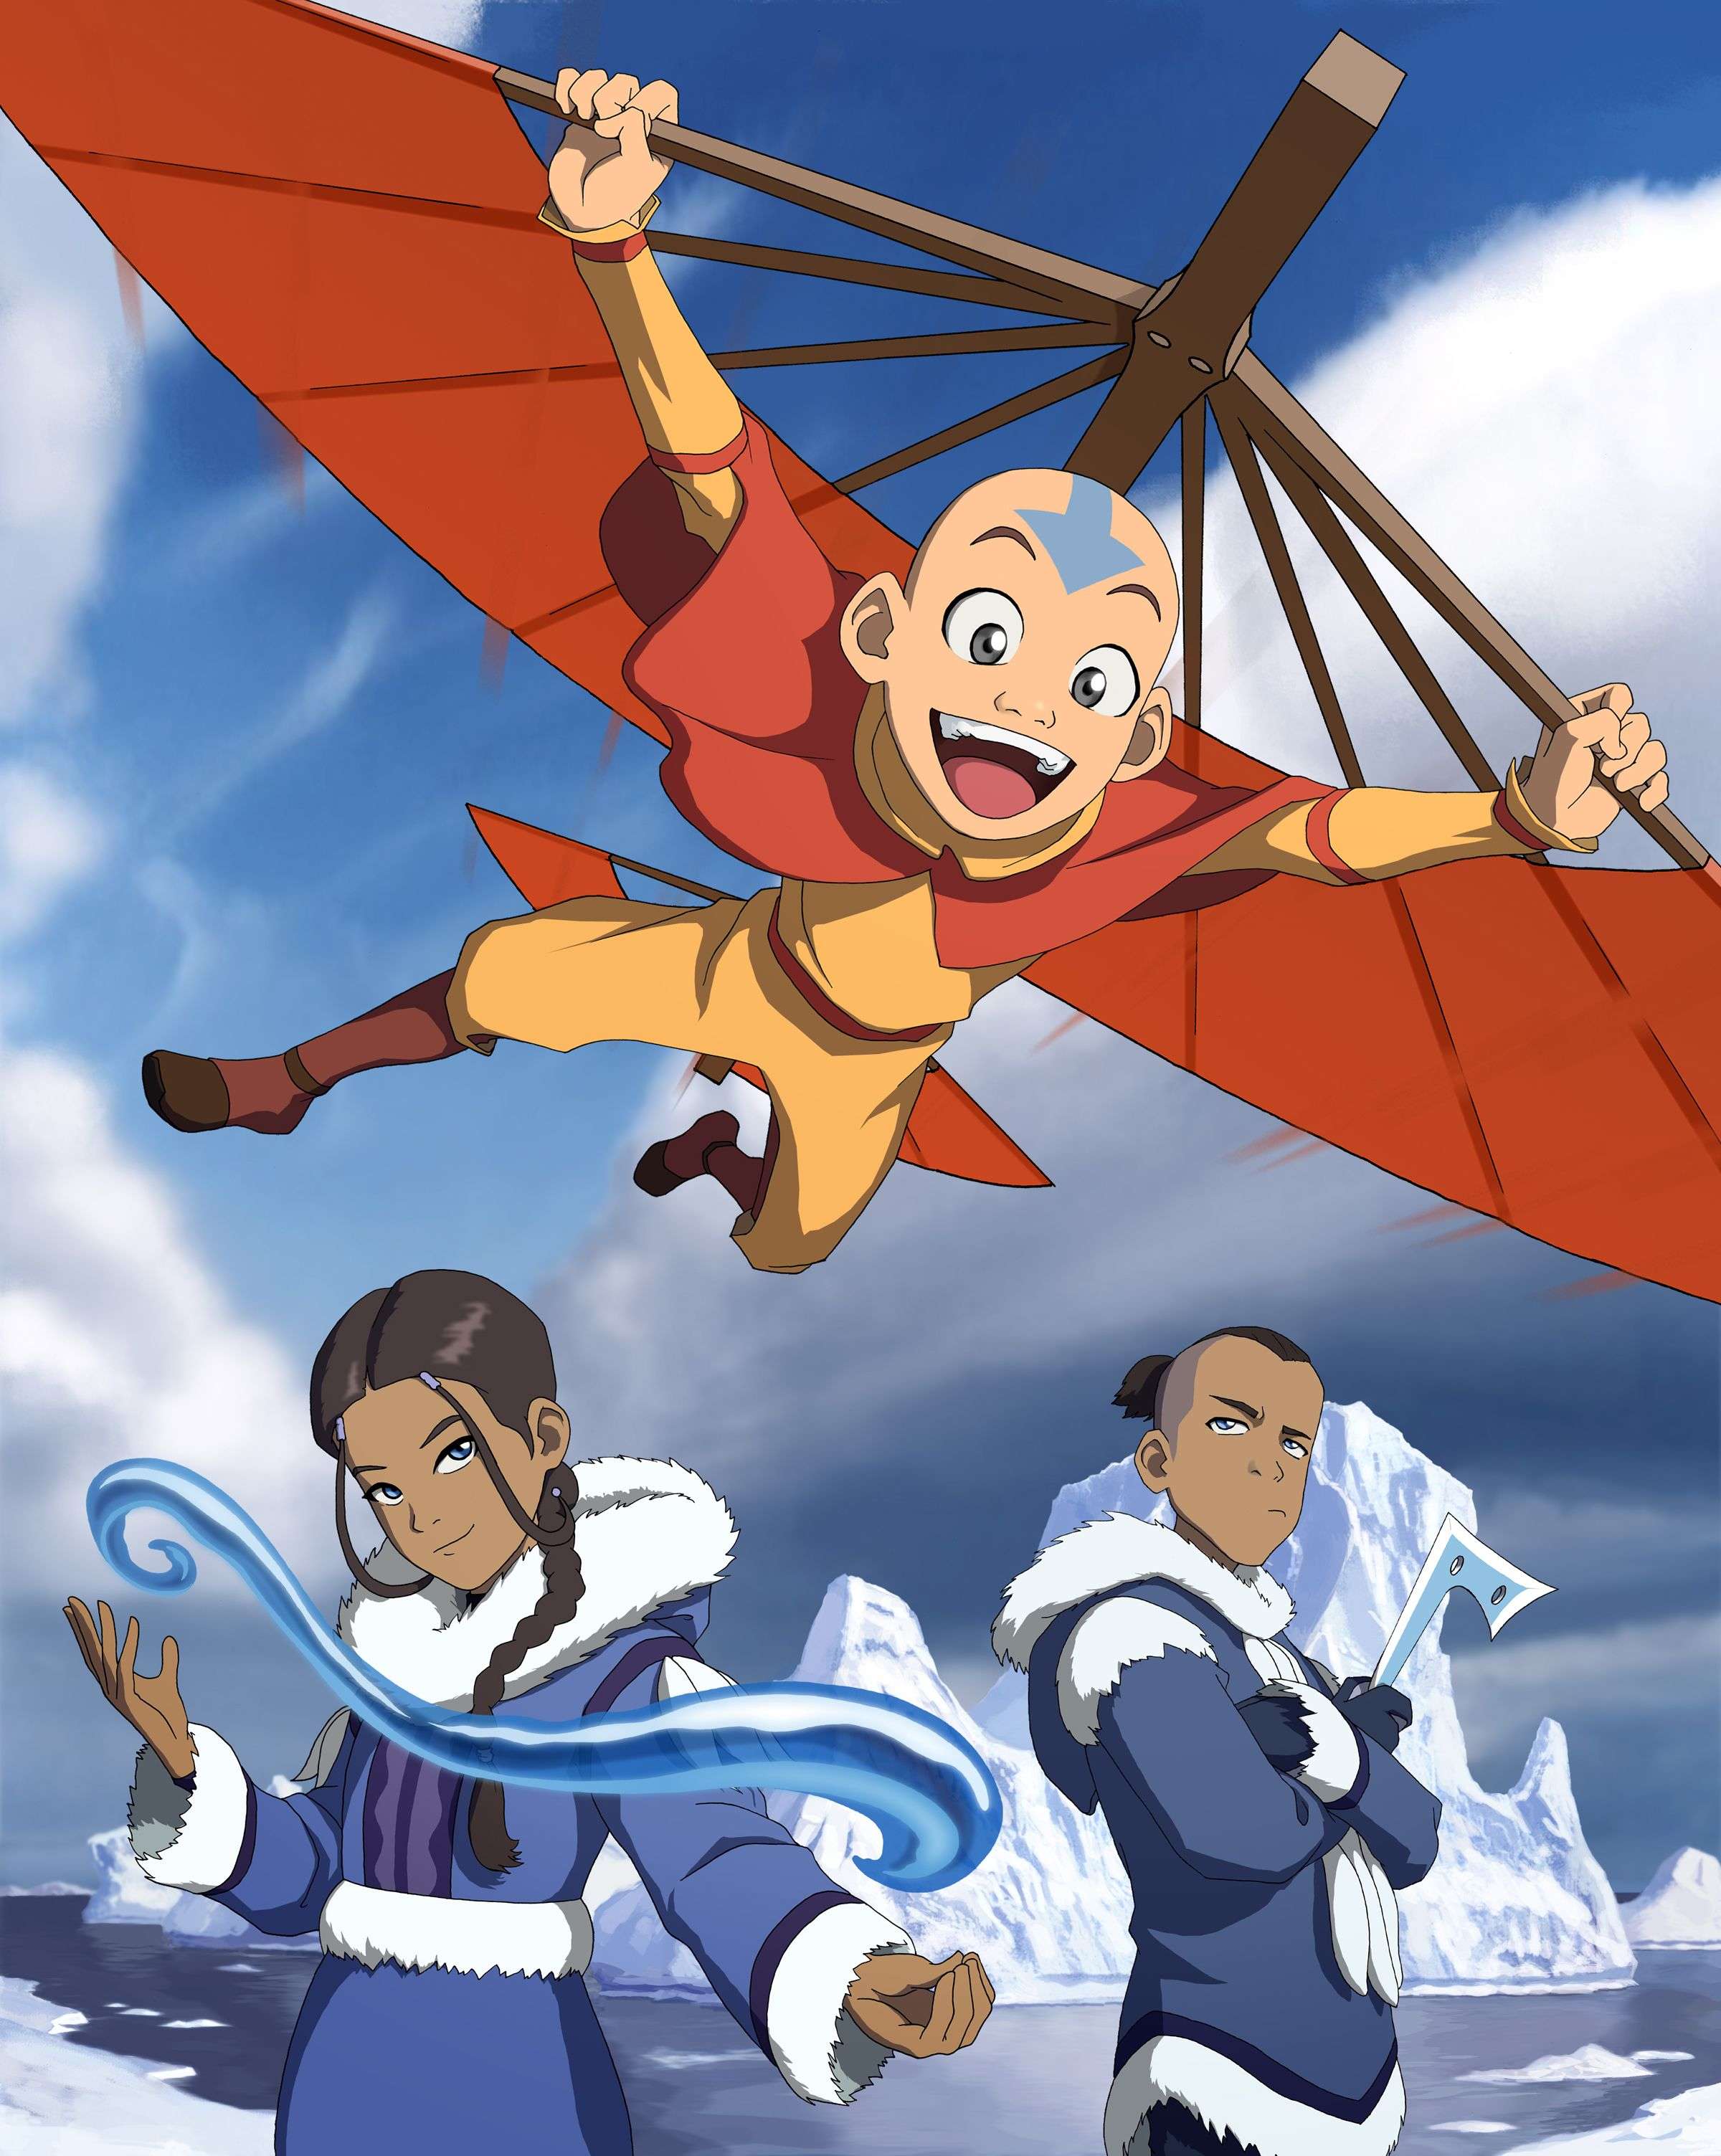 Avatar The Last Airbenders Unaired Pilot Is Streaming on Twitch